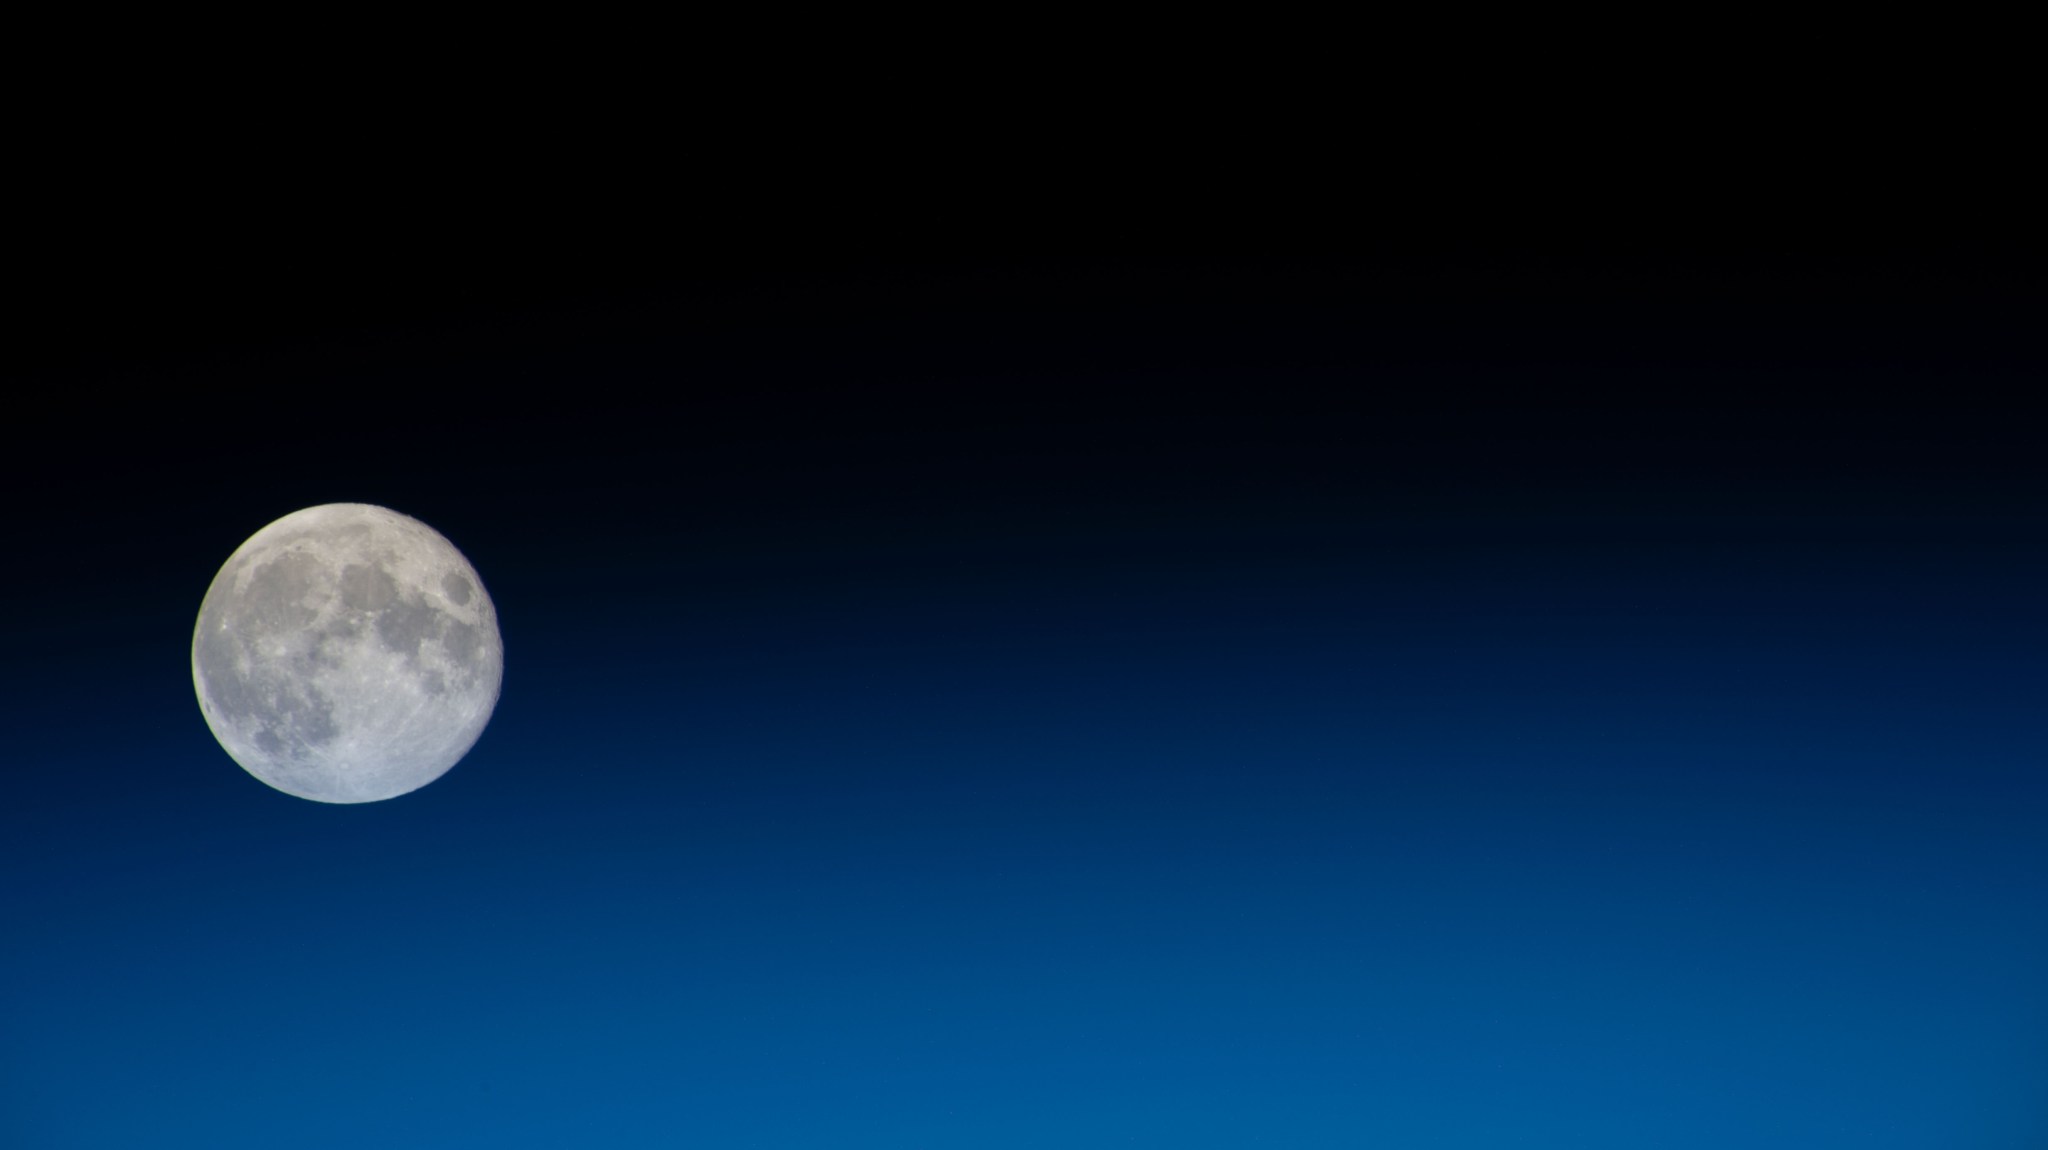 iss070e001516 (Sept. 30, 2023) -- A full Moon is pictured from the International Space Station. The Moon lingers to the left of the image, with a horizon of Earth's blue glow splitting the image nearly in half, blending into the black of space.